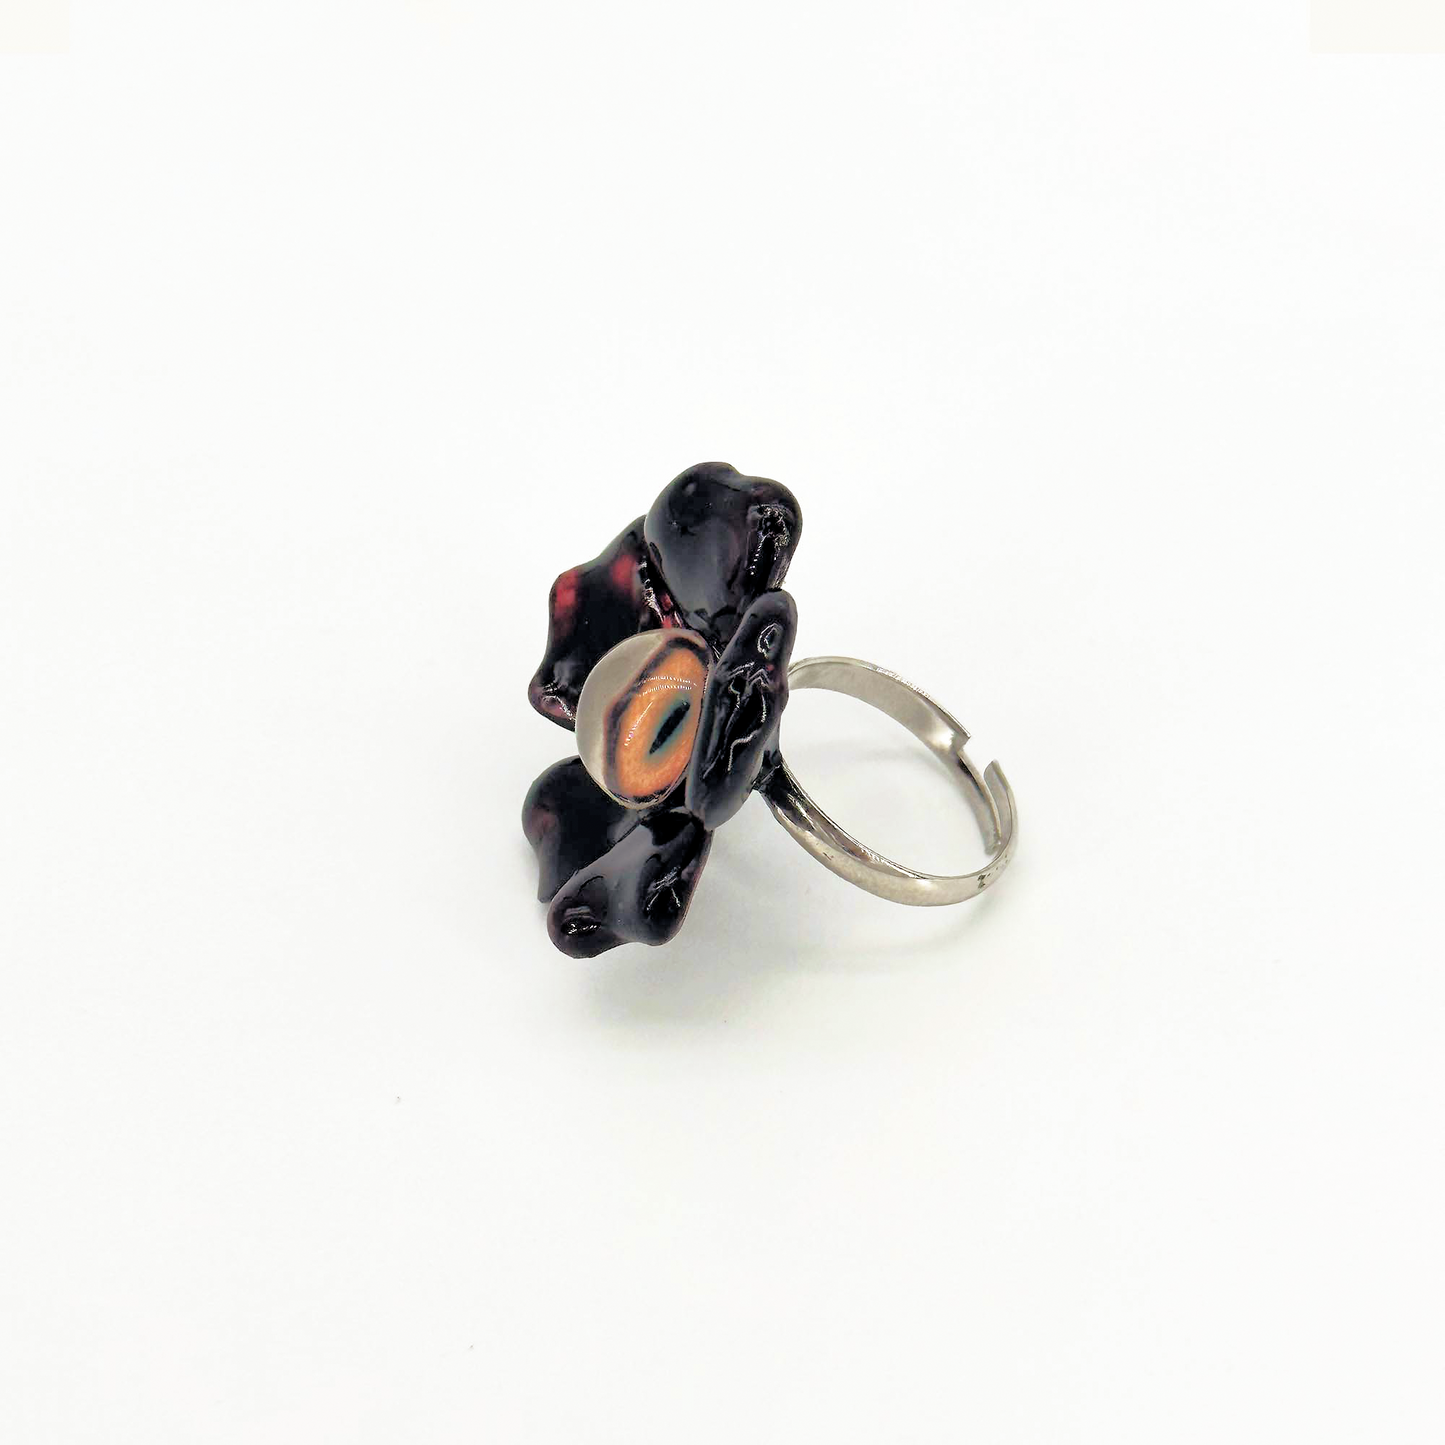 Side view of handmade ring with flower and eye elements